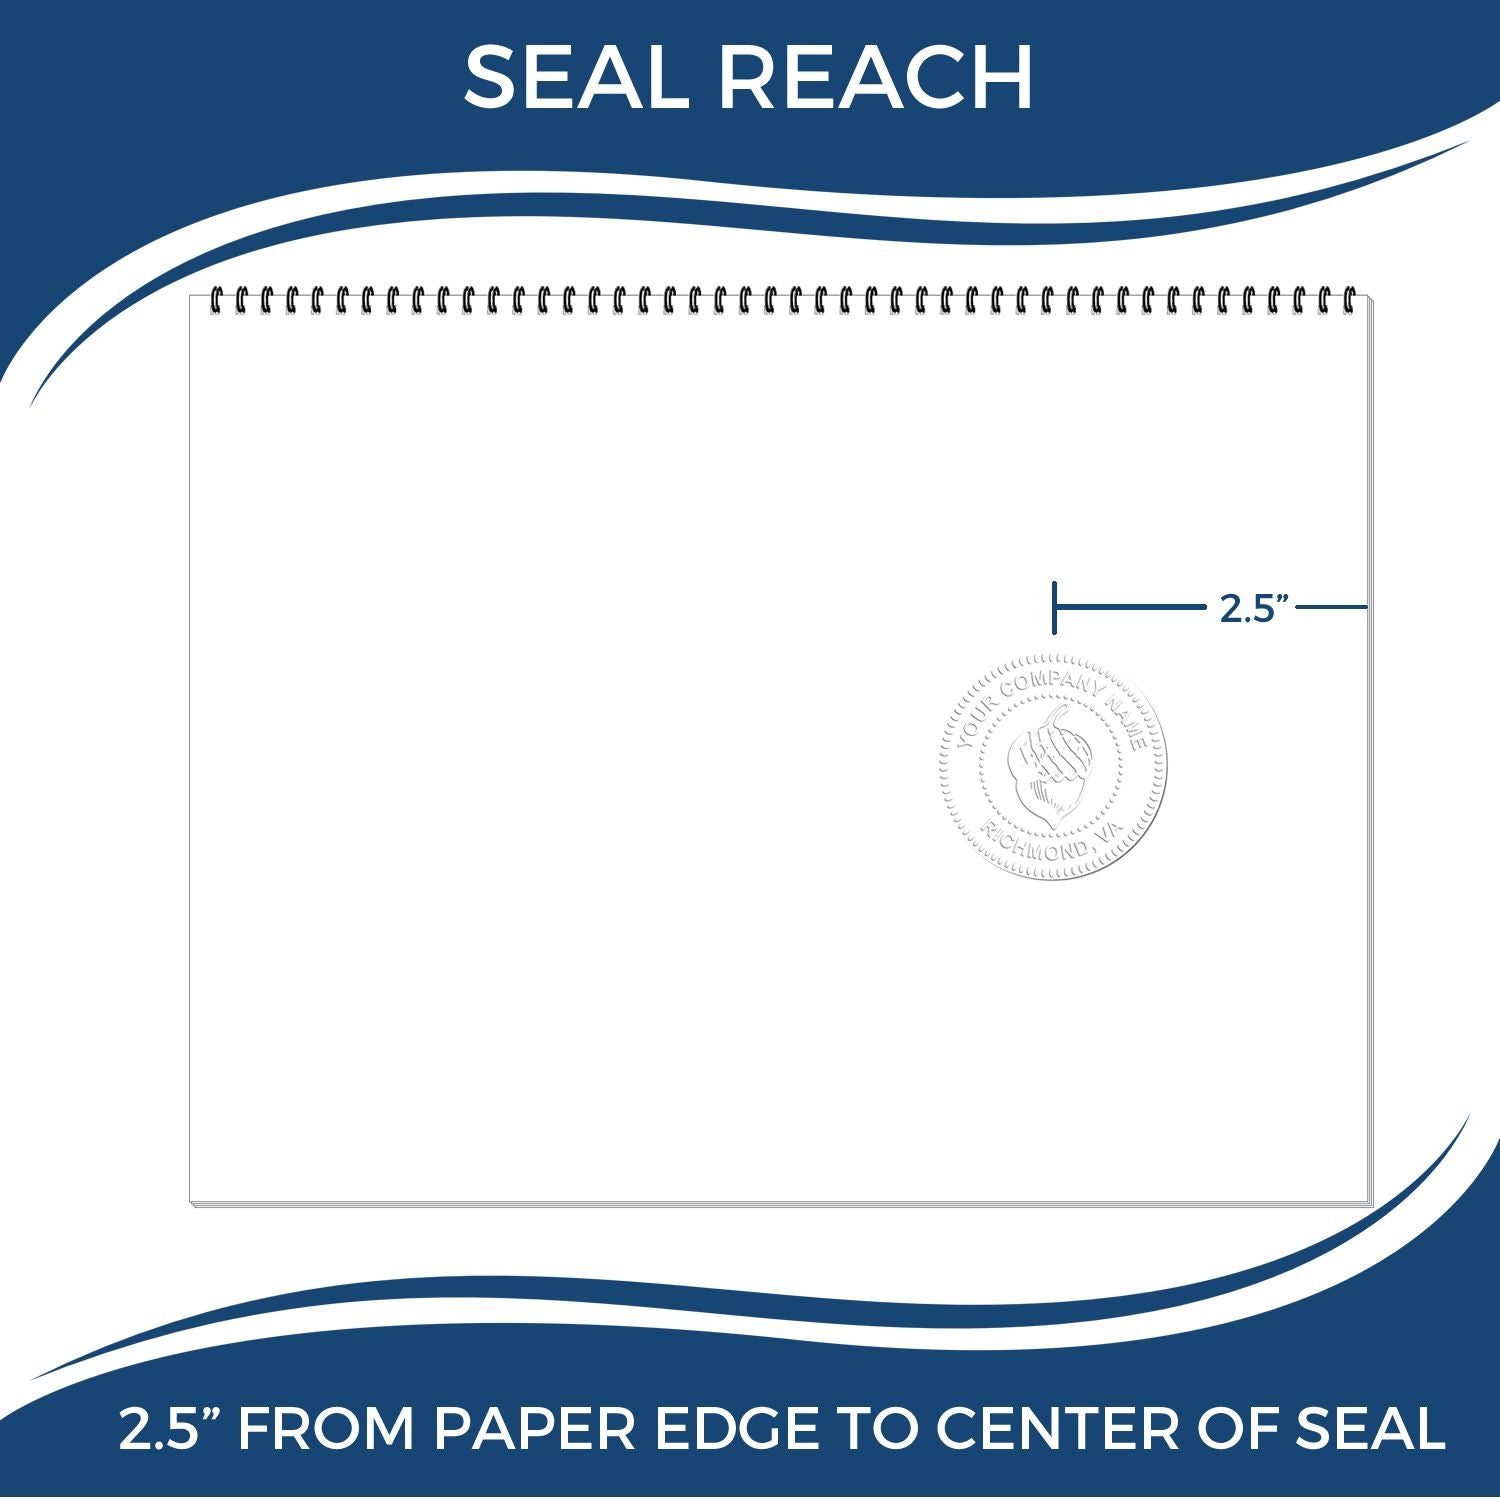 An infographic showing the seal reach which is represented by a ruler and a miniature seal image of the Heavy Duty Cast Iron Washington Engineer Seal Embosser